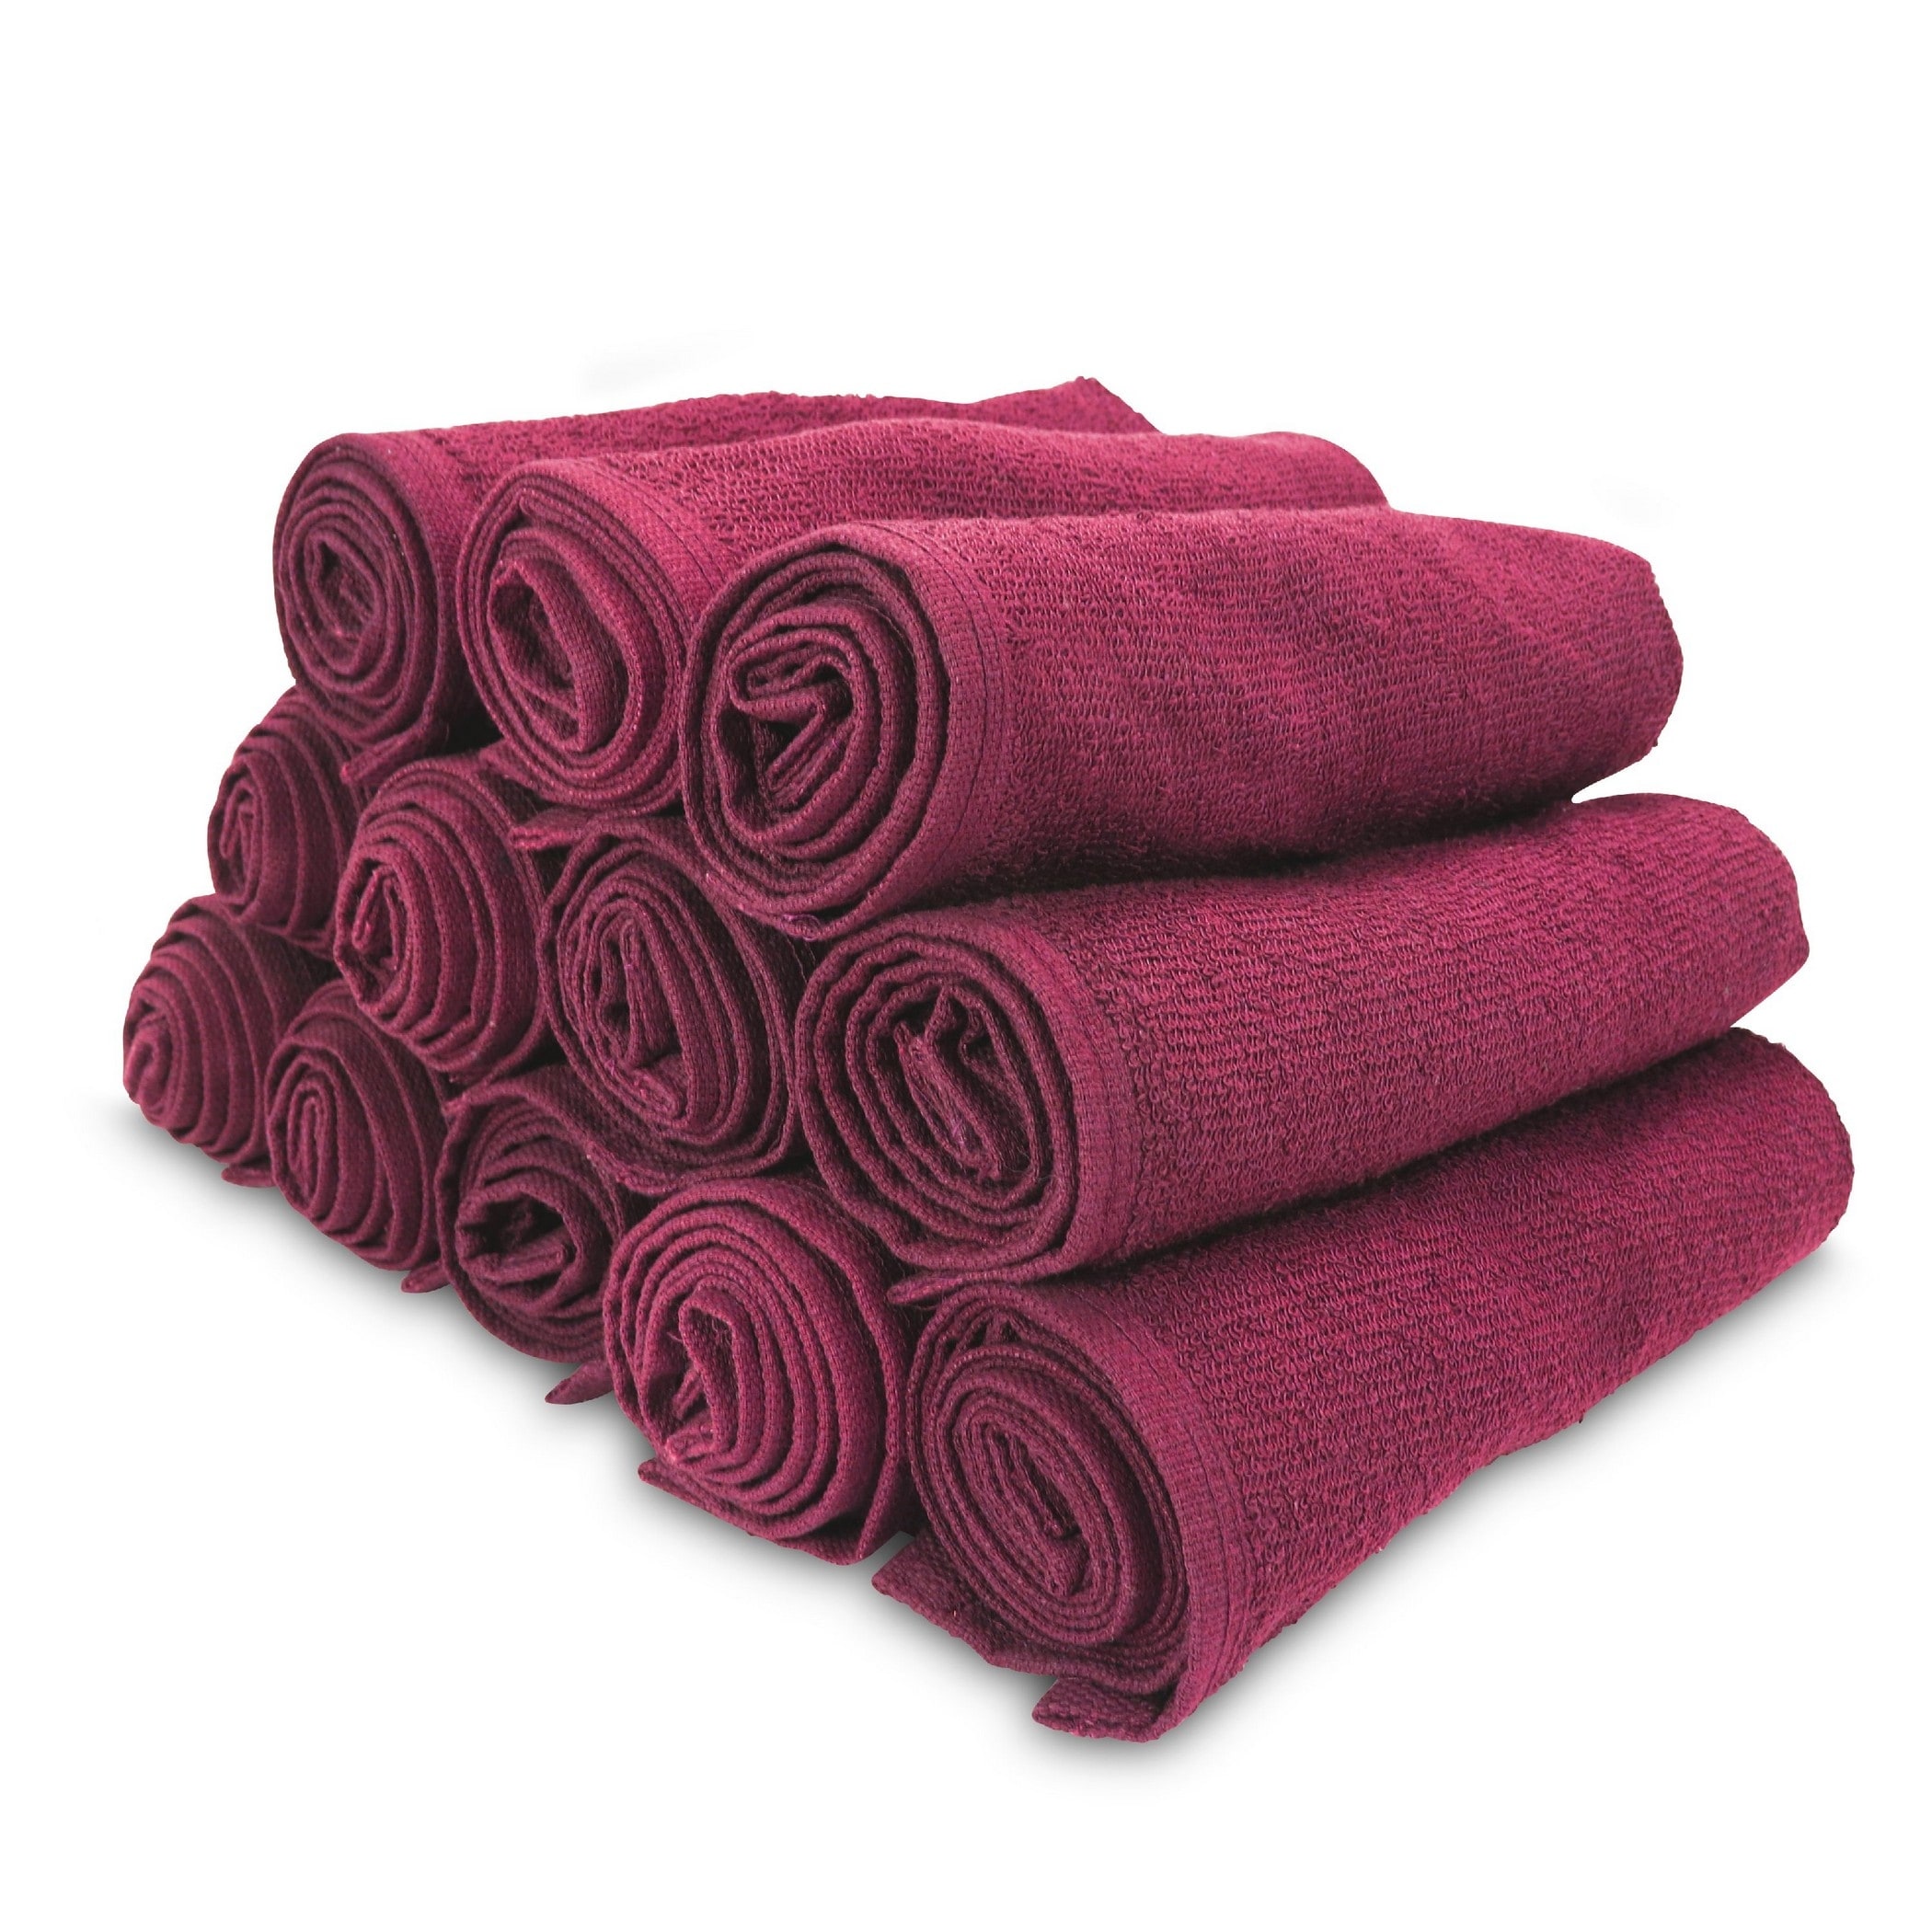 https://ak1.ostkcdn.com/images/products/is/images/direct/8ffed9a0275a16ebcf6249dd52a172aa2dc669be/Arkwright-12-Piece-Salon-Towels.jpg